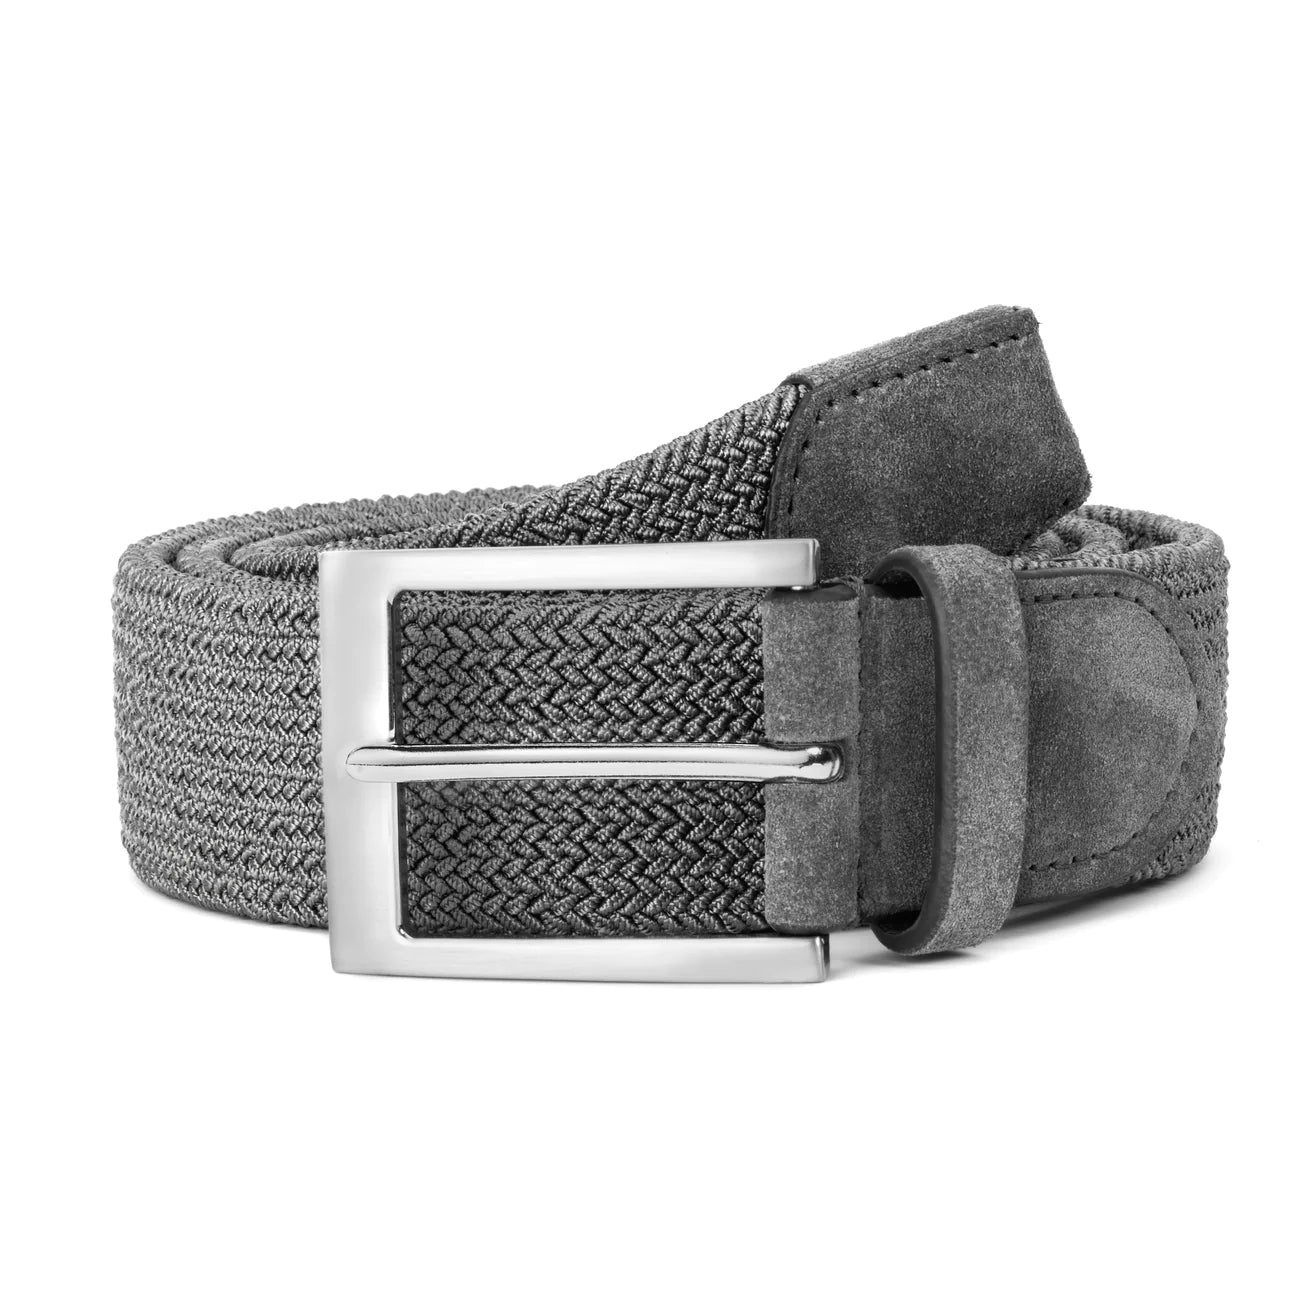 To Boot New York Woven Suede Belt Lavagna